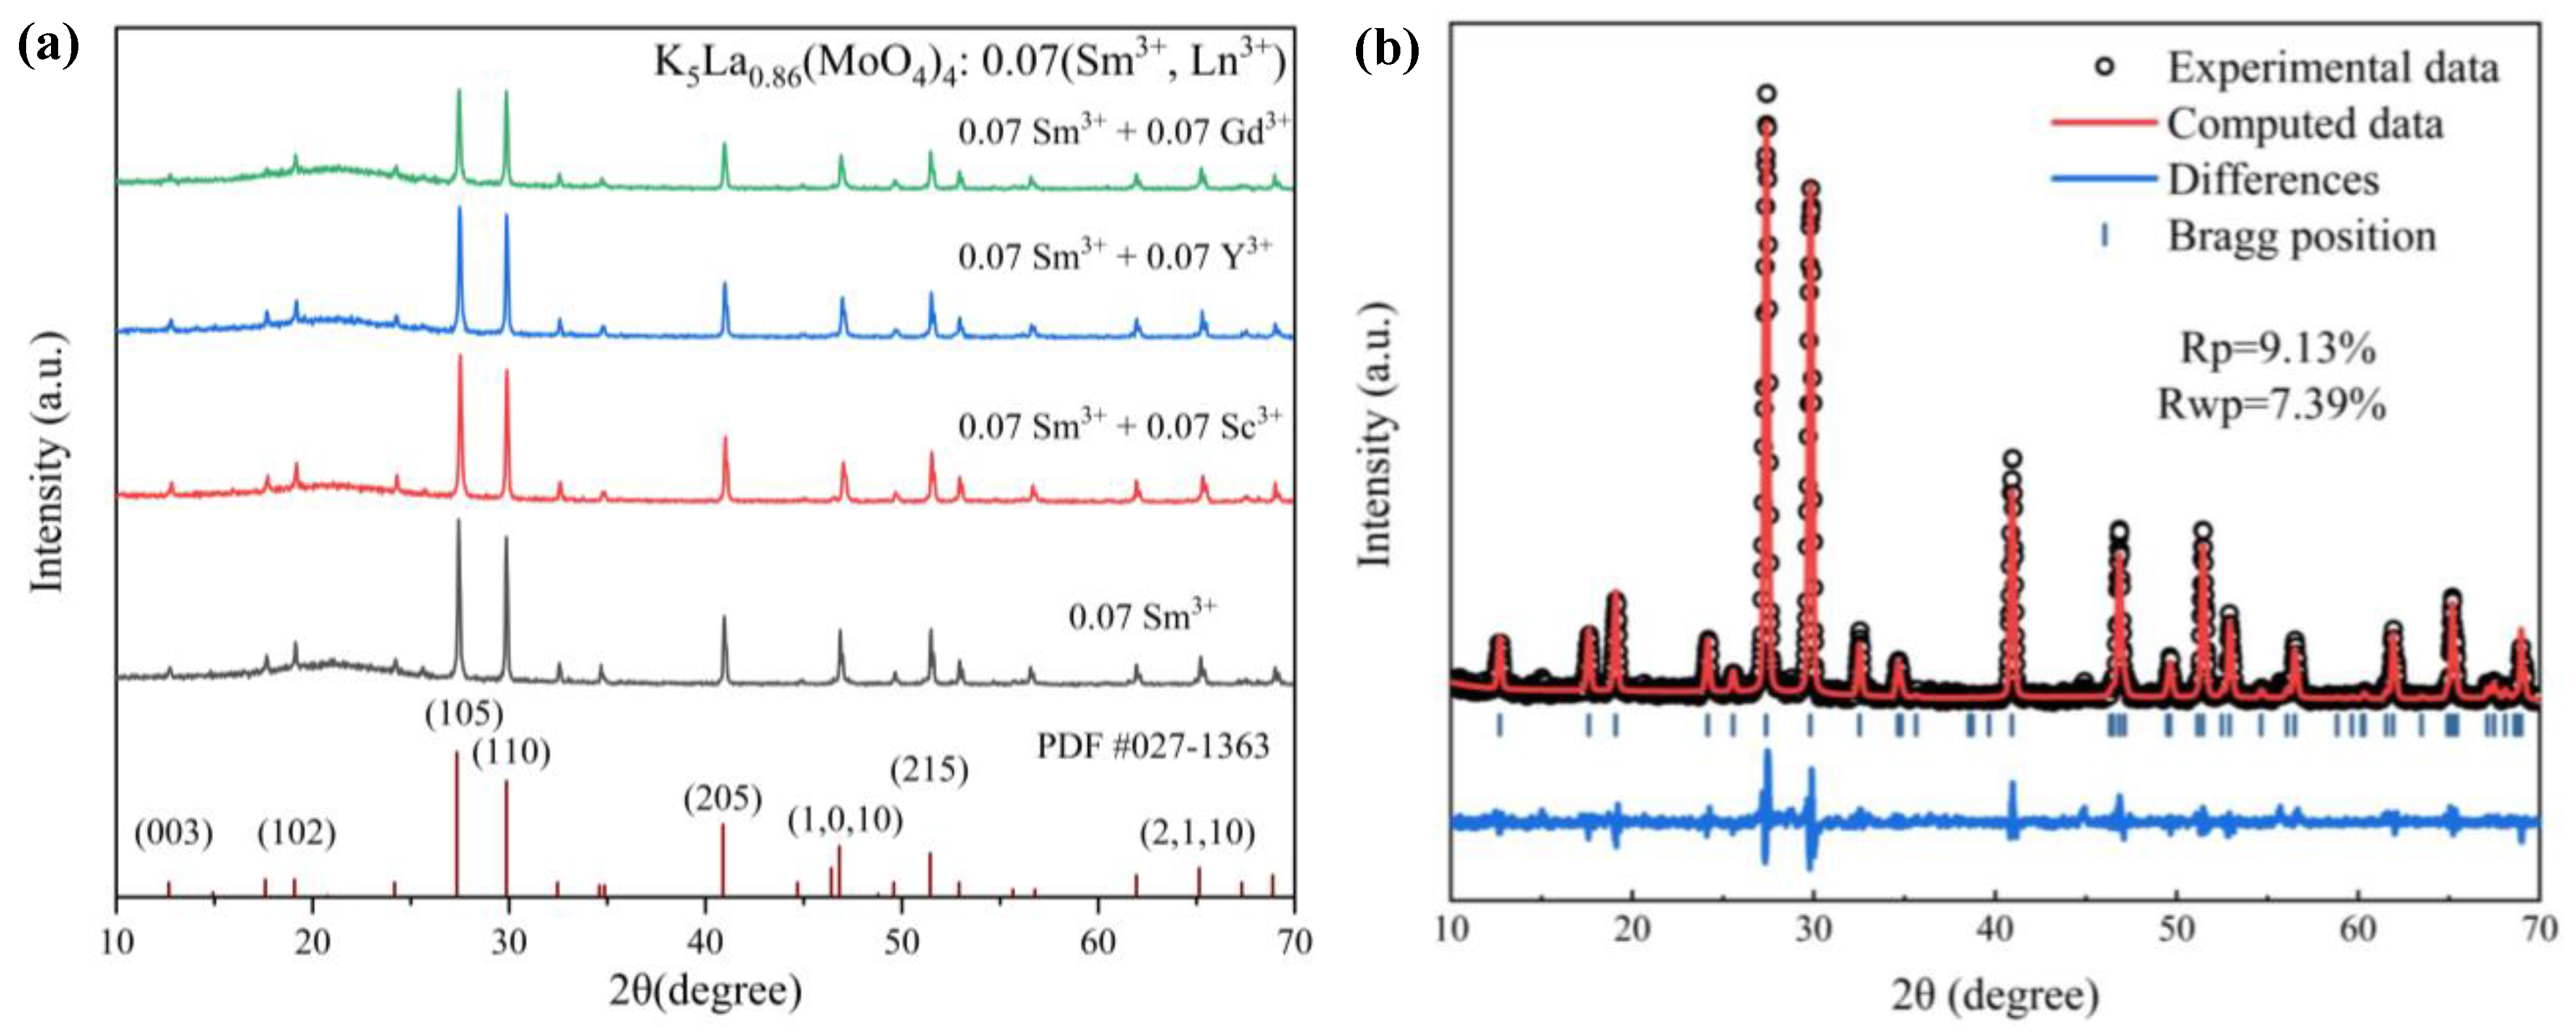 Lanthanide-Activated Phosphors Based on 4f-5d Optical Transitions